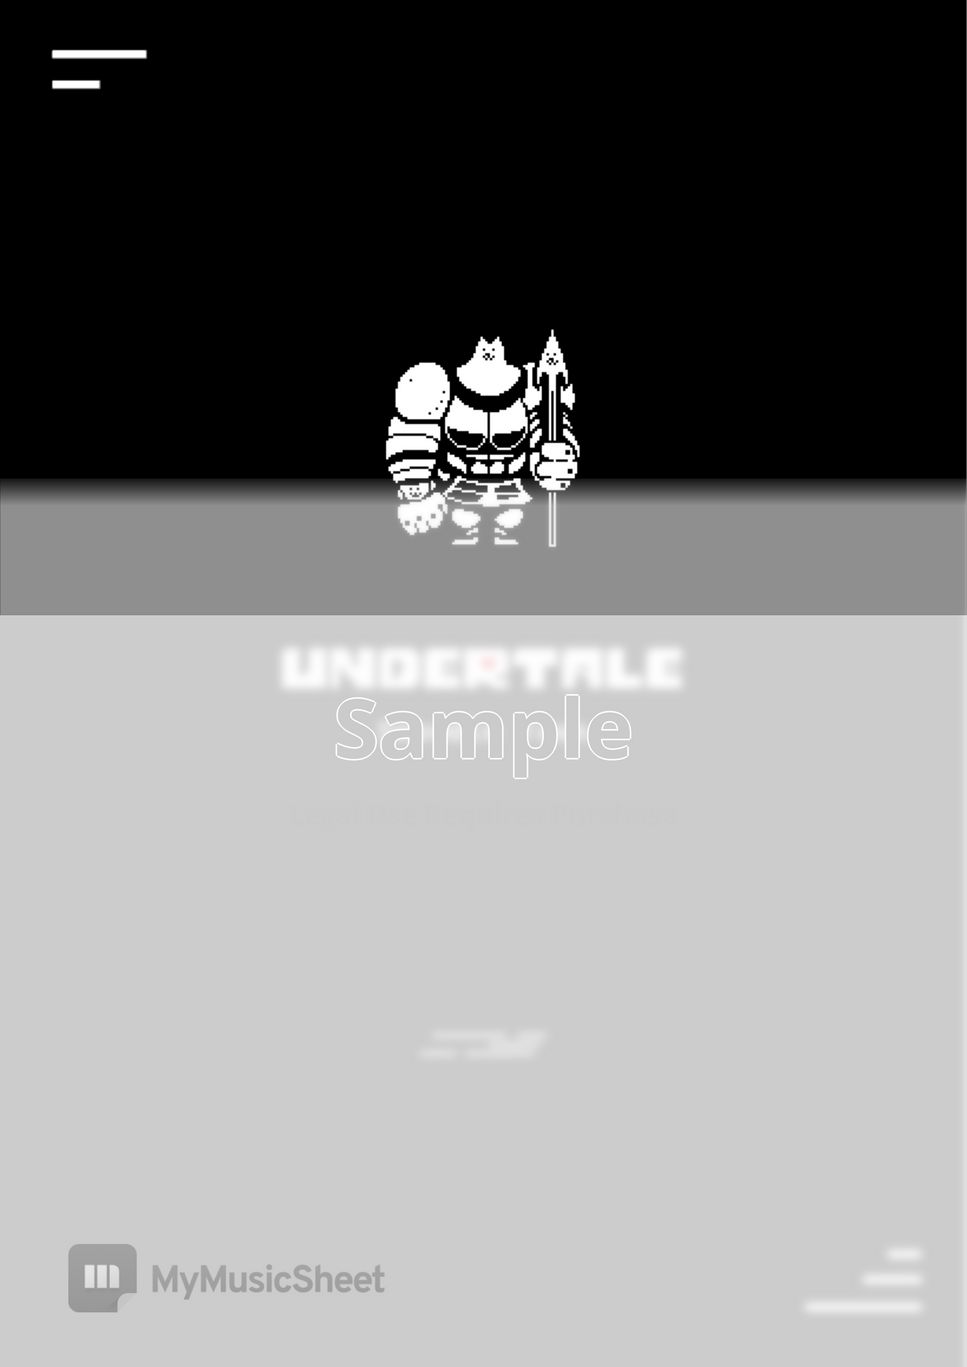 UNDERTALE OST - The Best of UNDERTALE OST Package Bundle (Total 21 Songs) by PianoBox